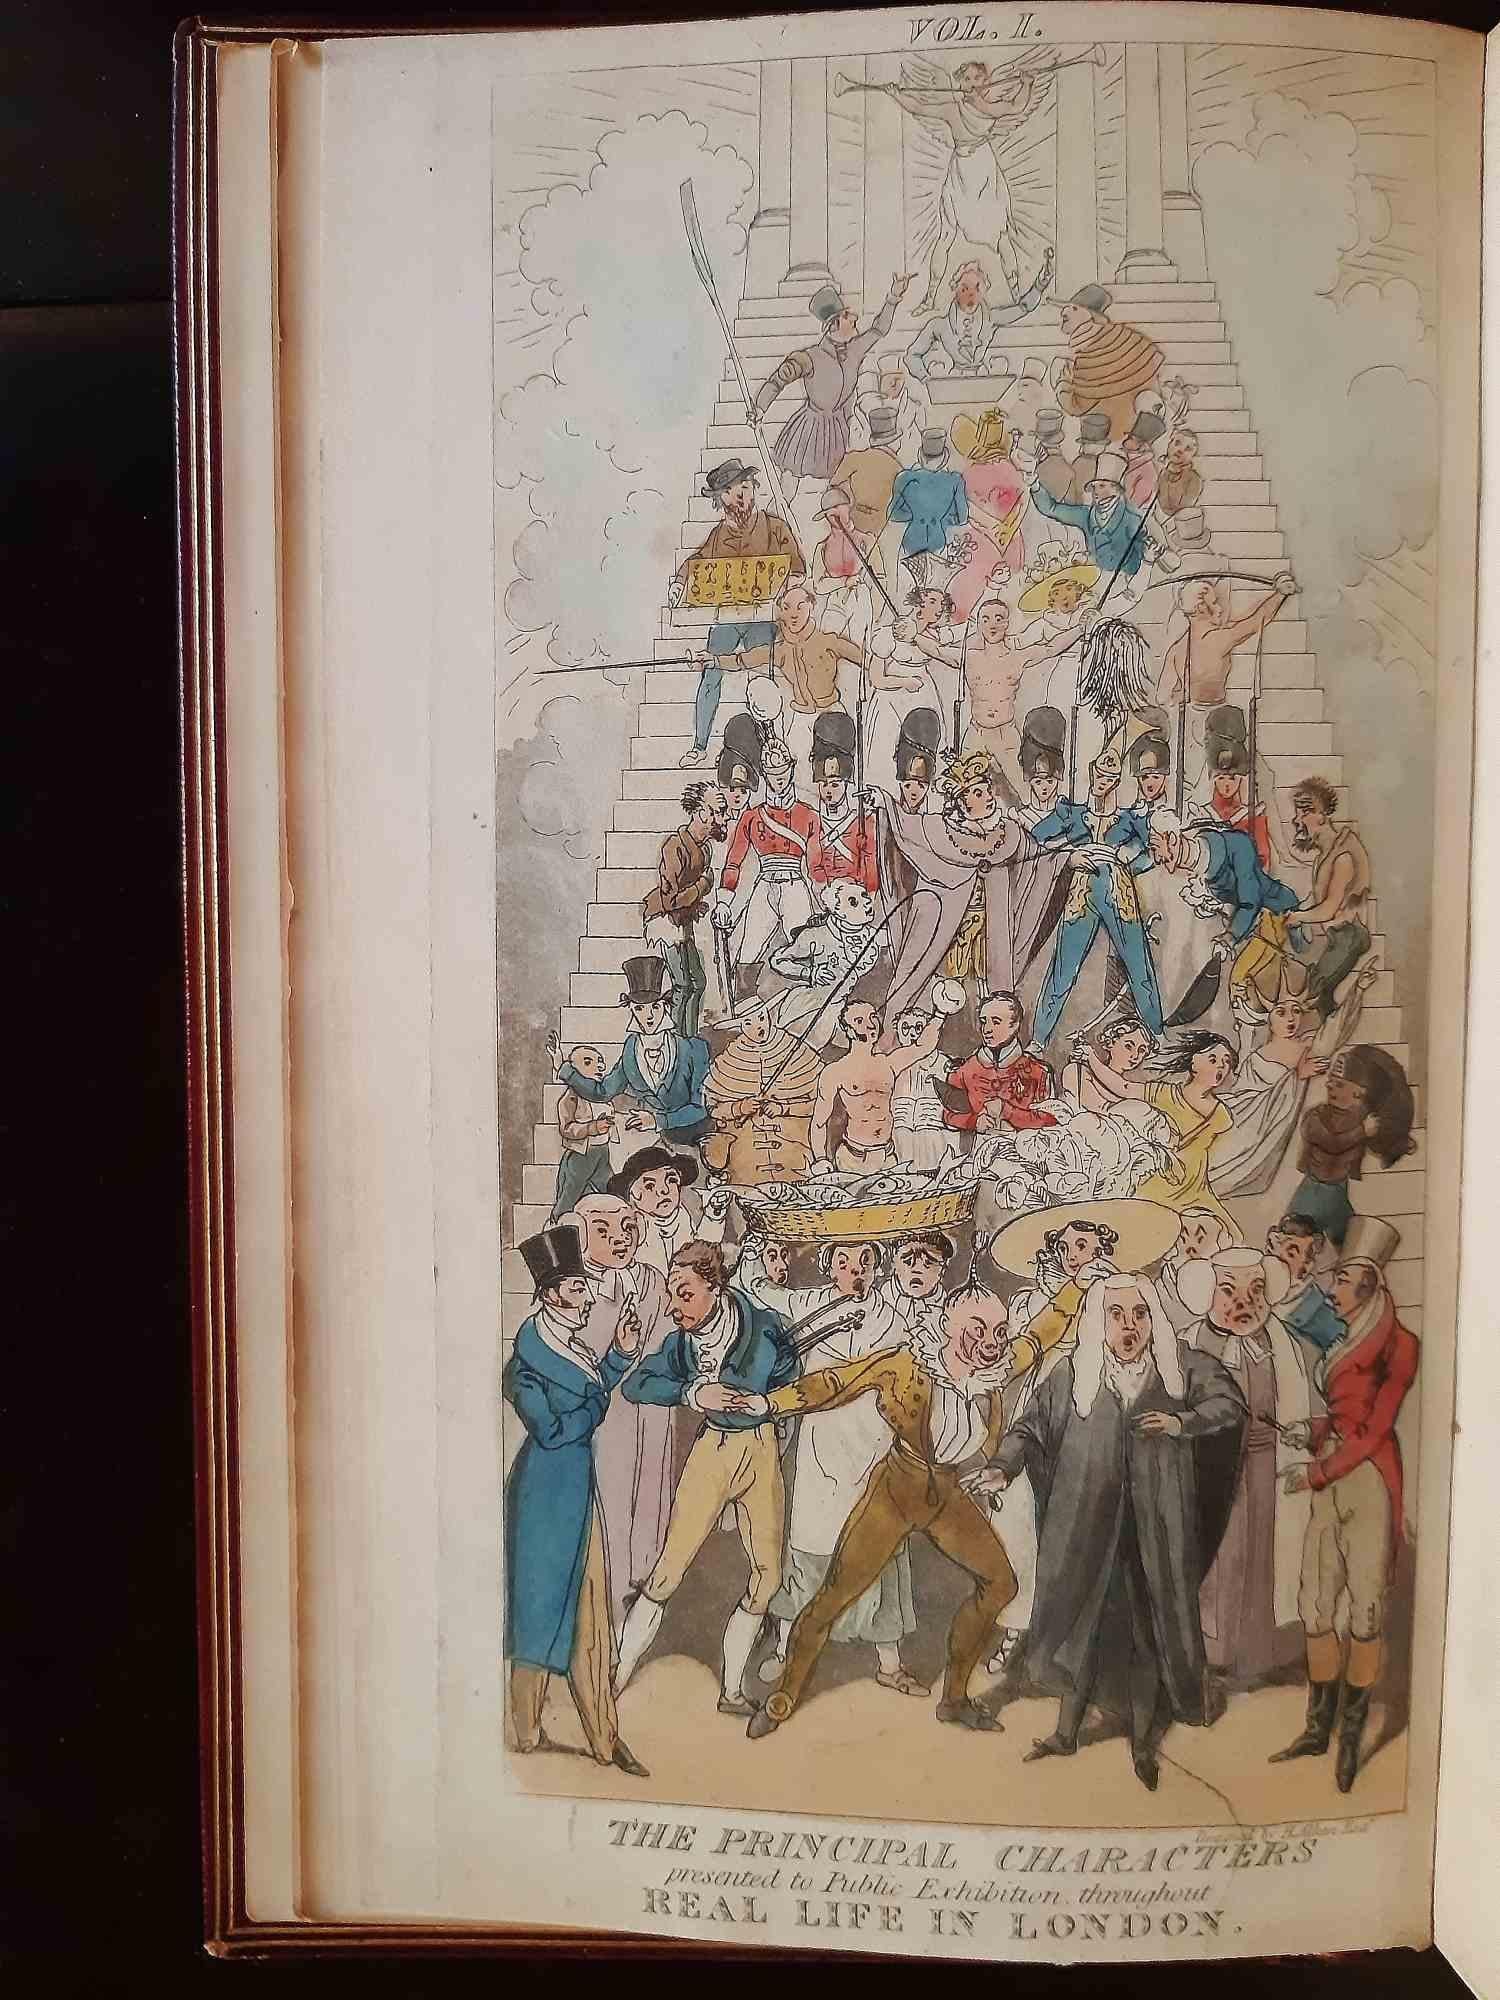 Real Life in London - Rare Book Illustrated by T. Rowlandson - 1820s - Modern Art by Thomas Rowlandson